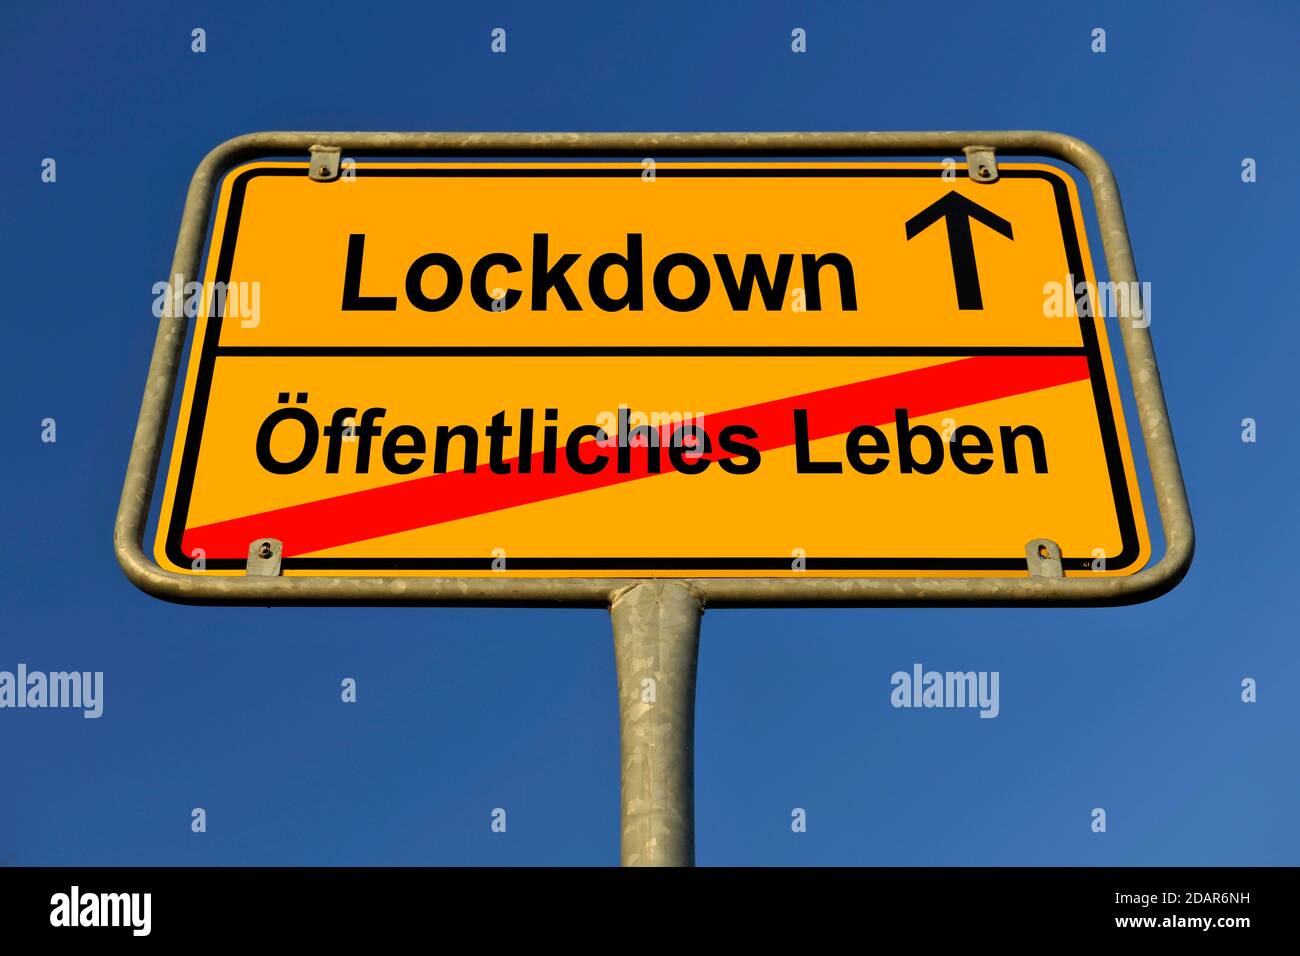 Symbol image, End of public life through second lockdown, Second wave of the Corona crisis, Germany Stock Photo